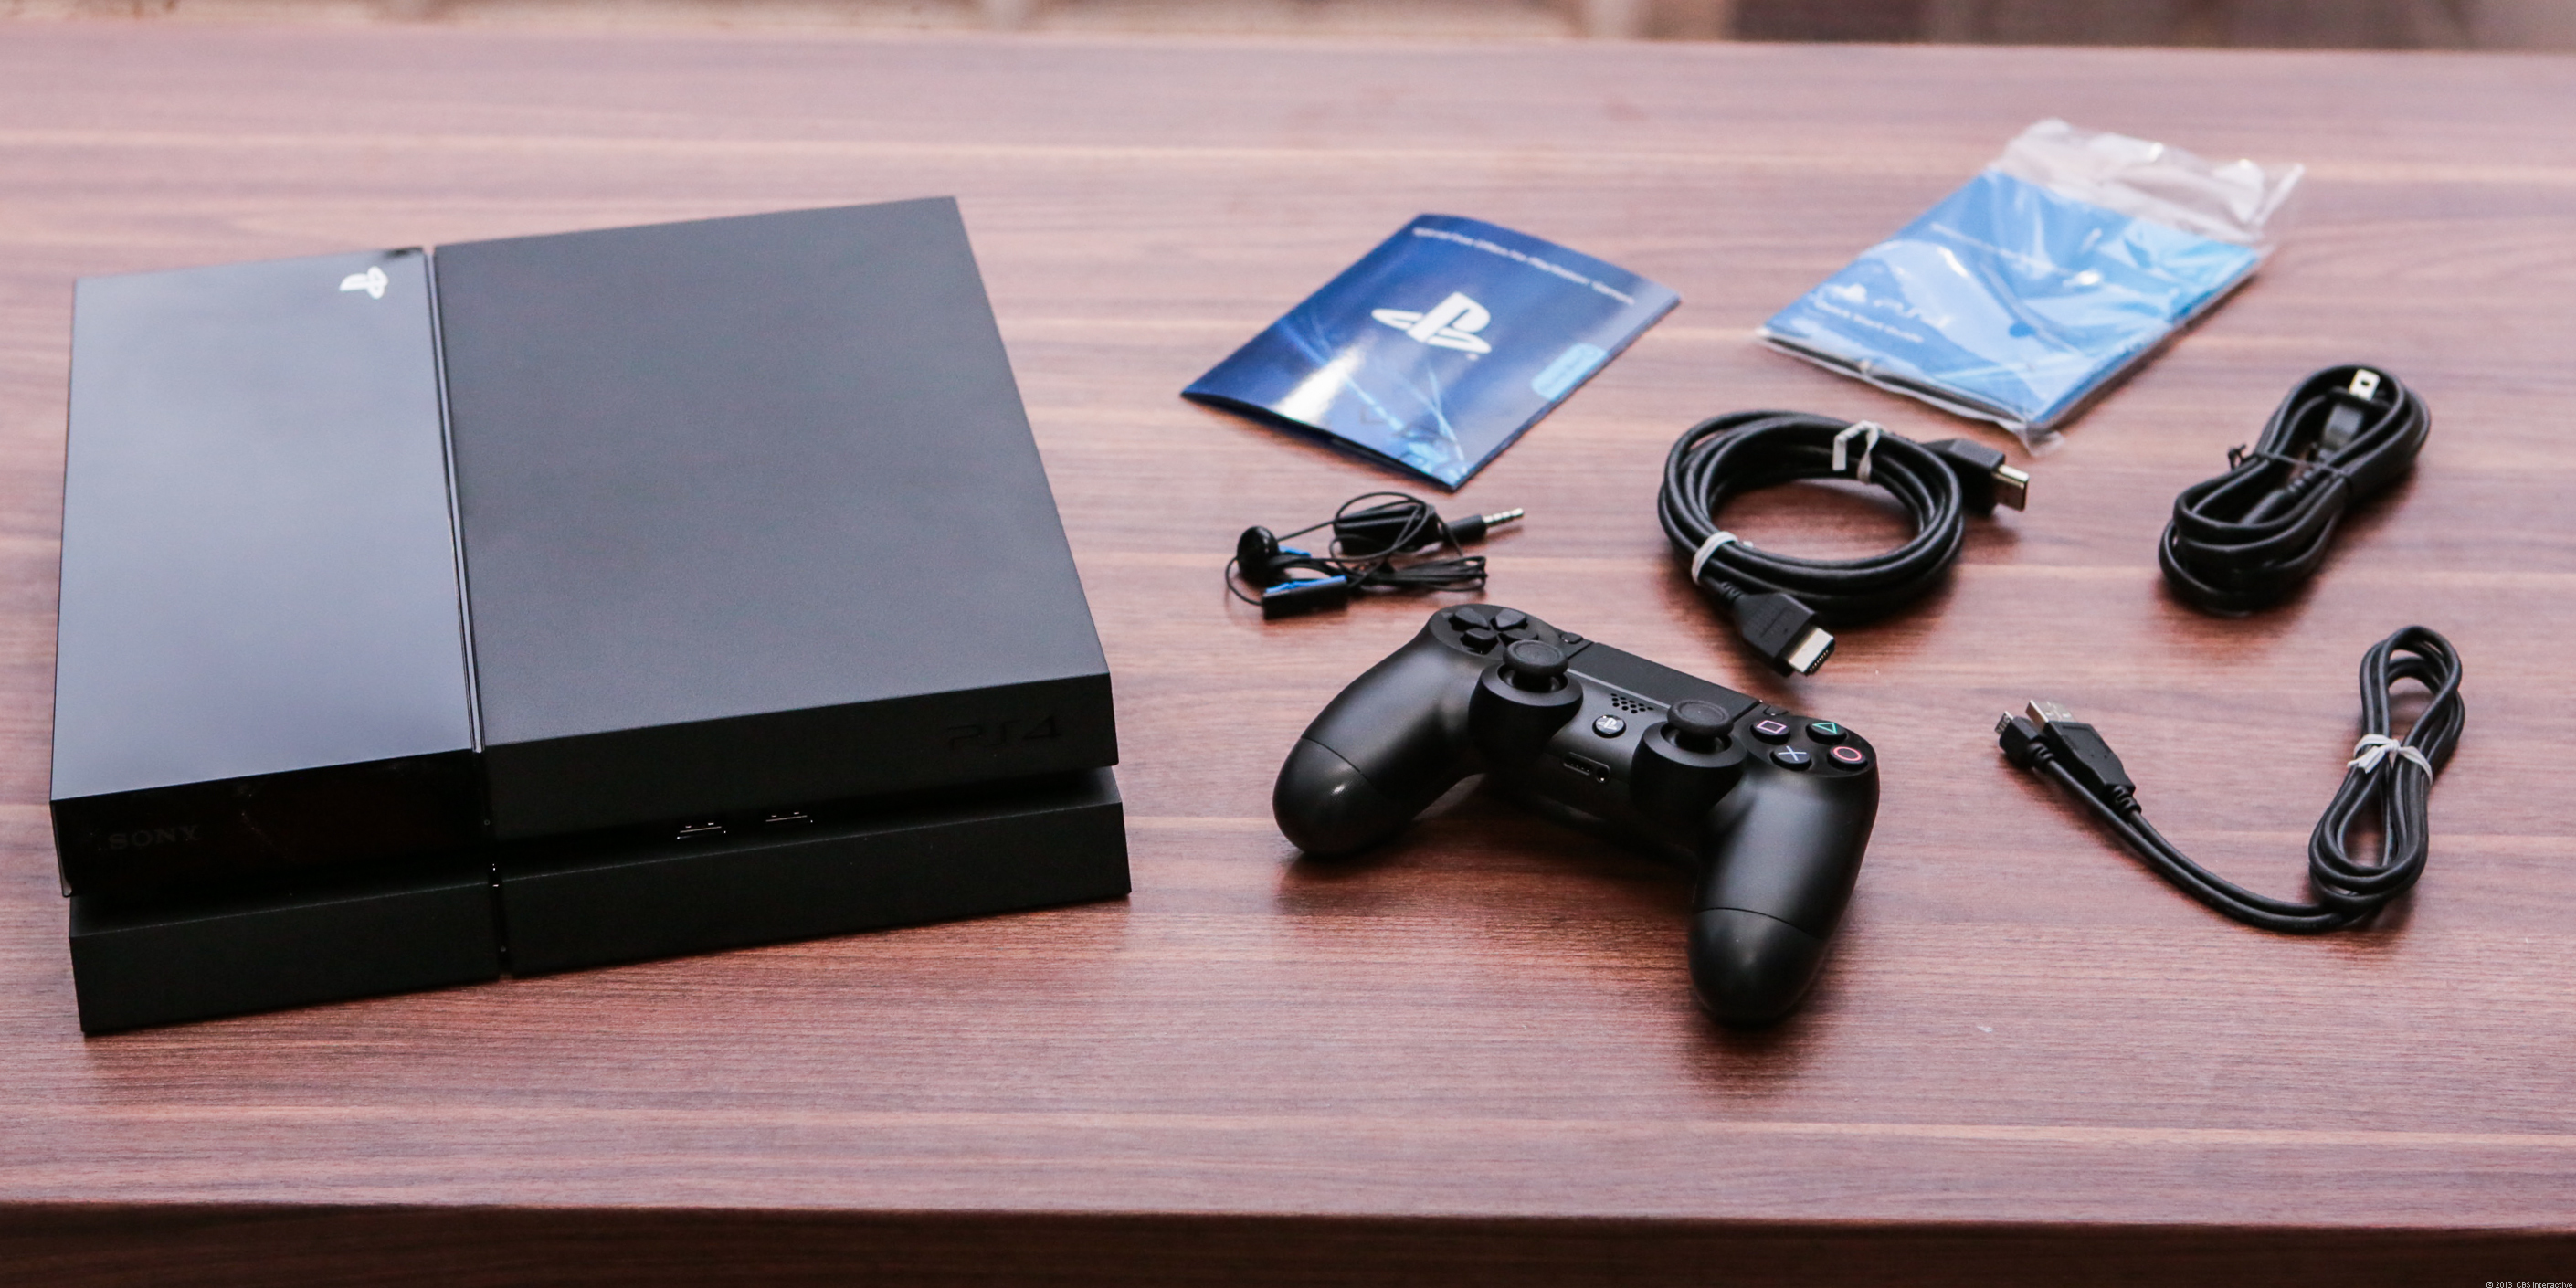 Sony's PS4 should be able to rest easier now